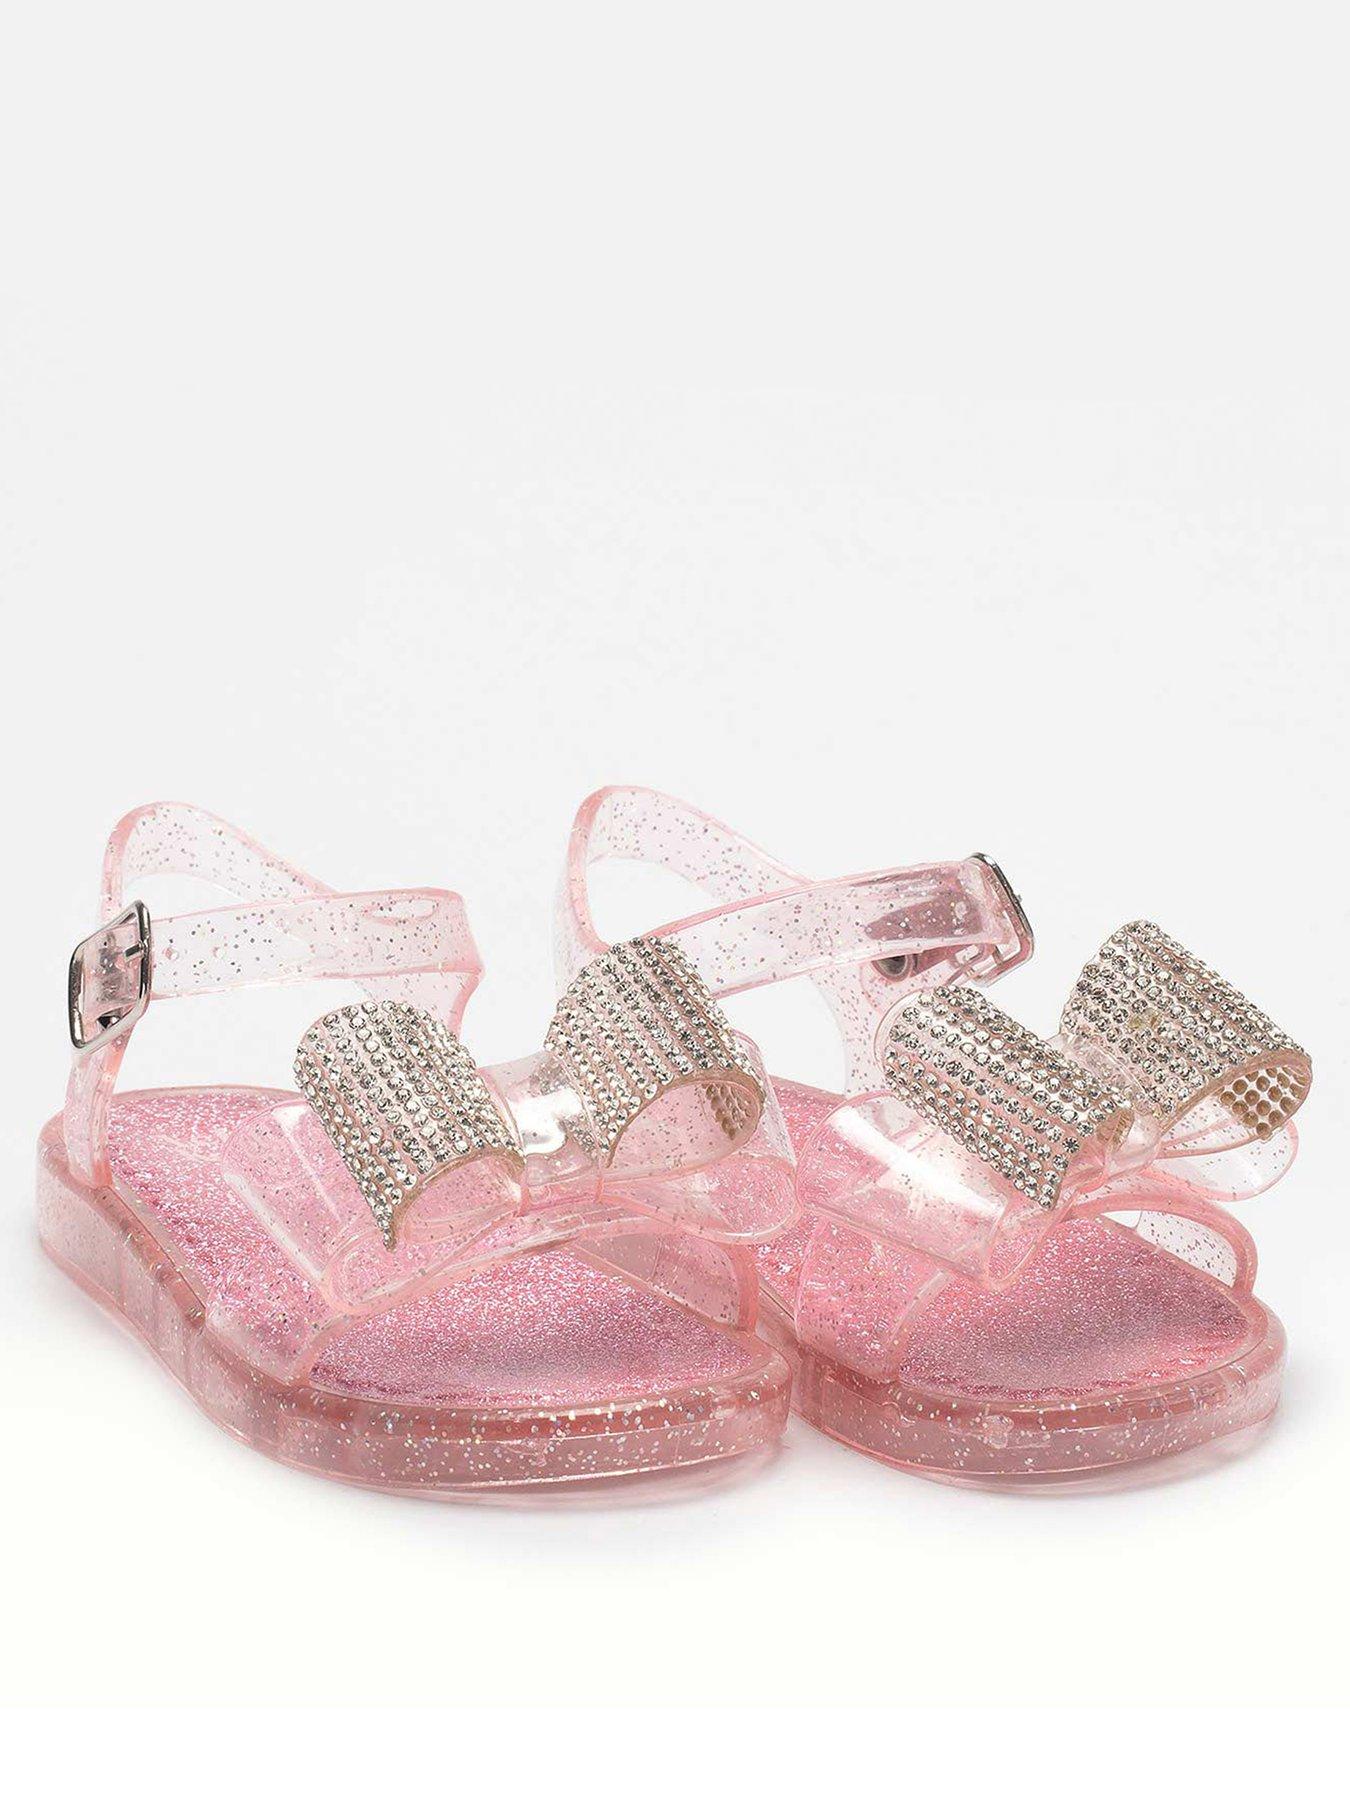 jelly kelly shoes